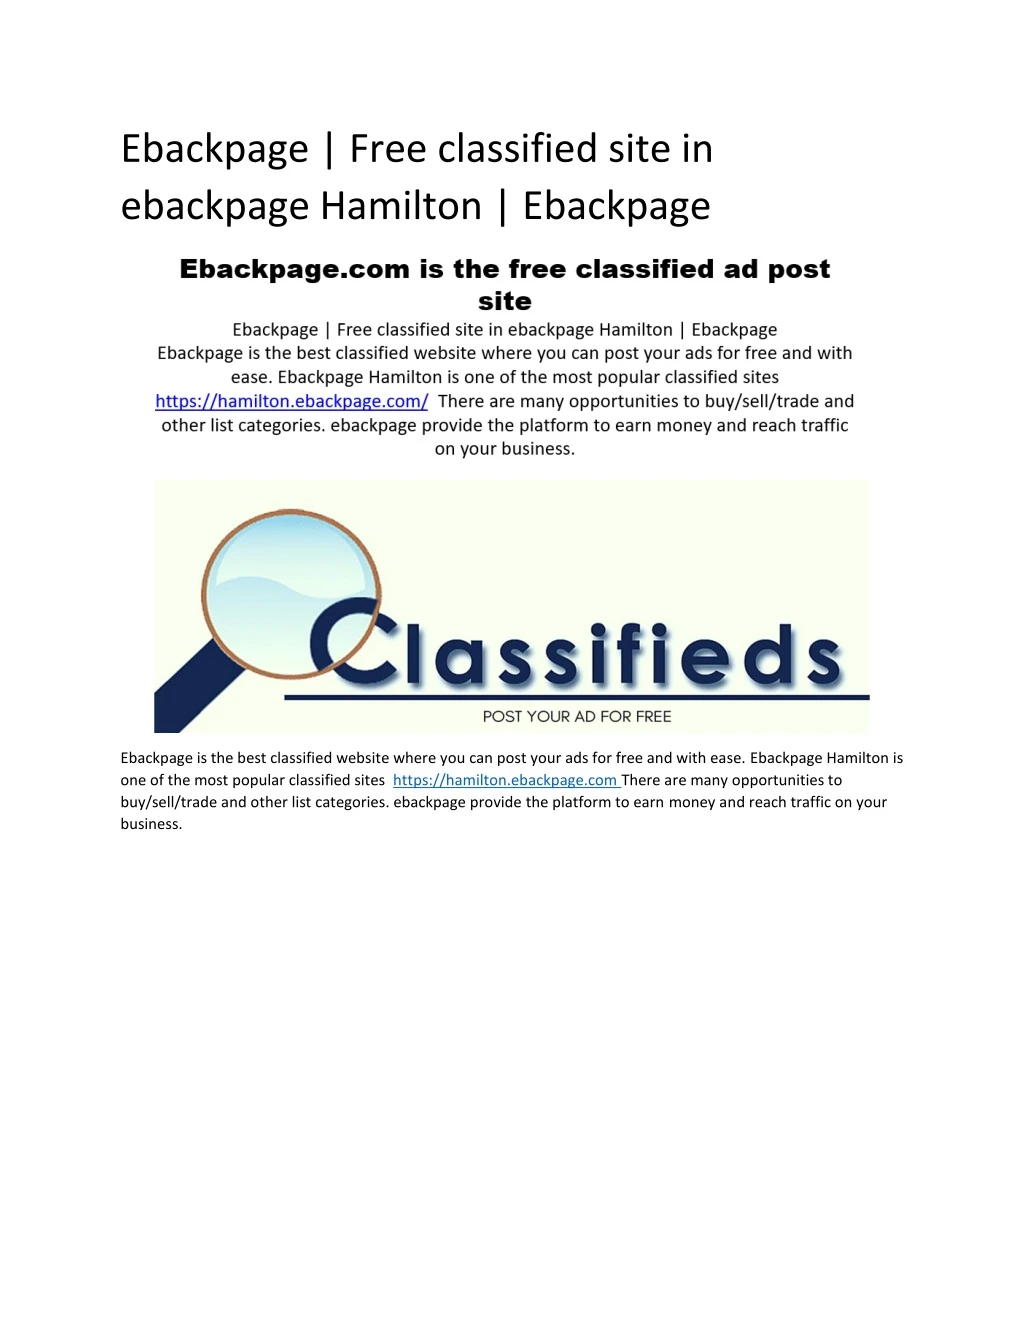 ebackpage free classified site in ebackpage